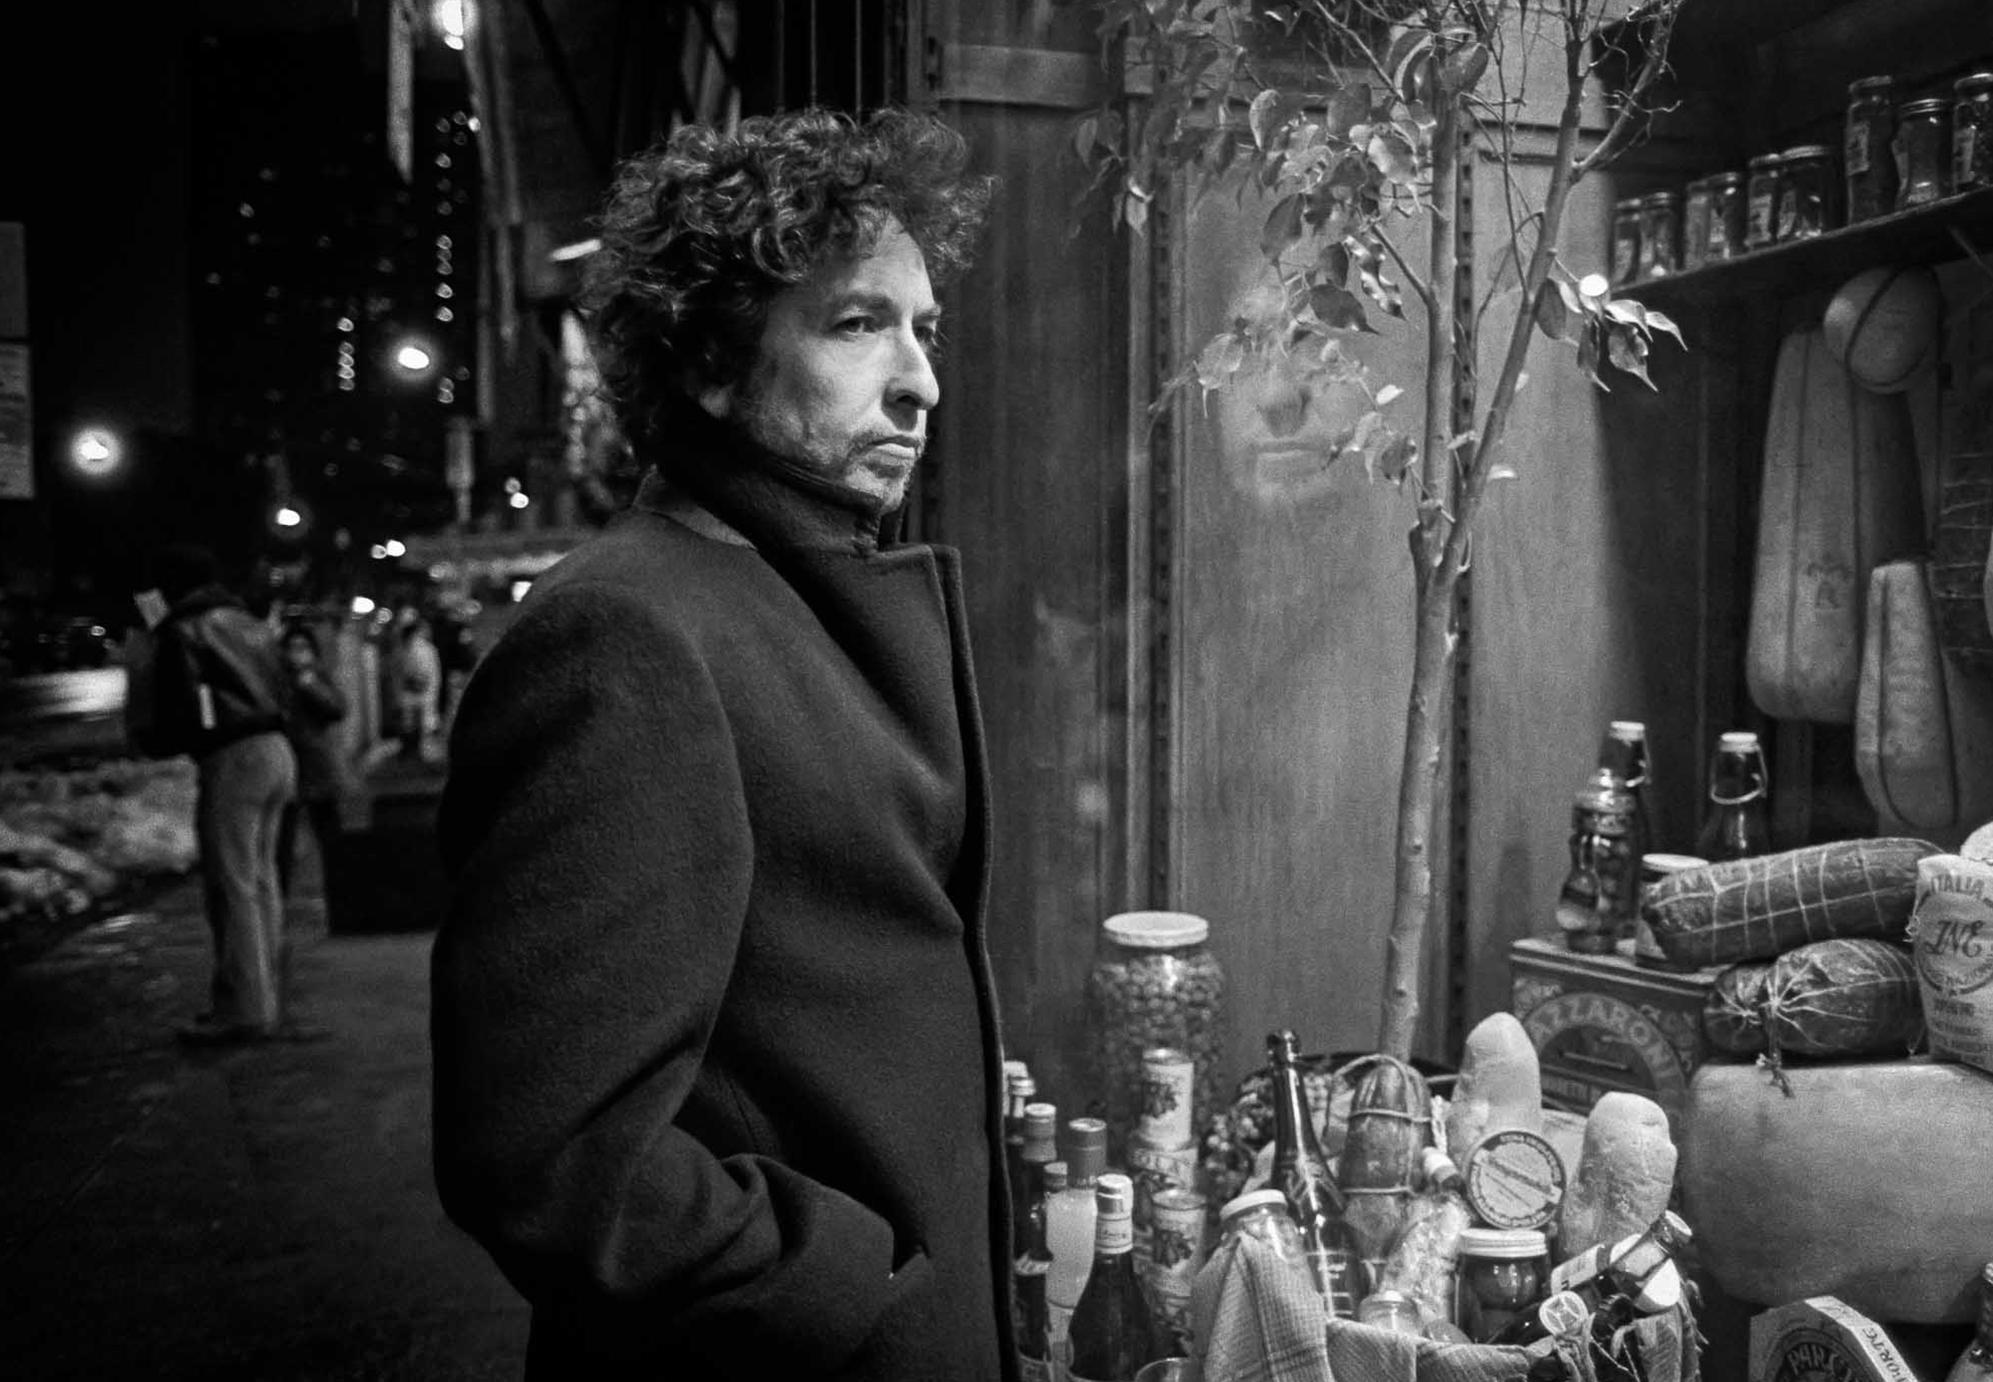 Signed limited edition 20x24"" print of Bob Dylan by Lynn Goldsmith, taken in 1983

Limited edition number 7/20

Modern C-type print. Available for immediate shipping.

Lynn Goldsmith has documented over five decades of American culture, capturing